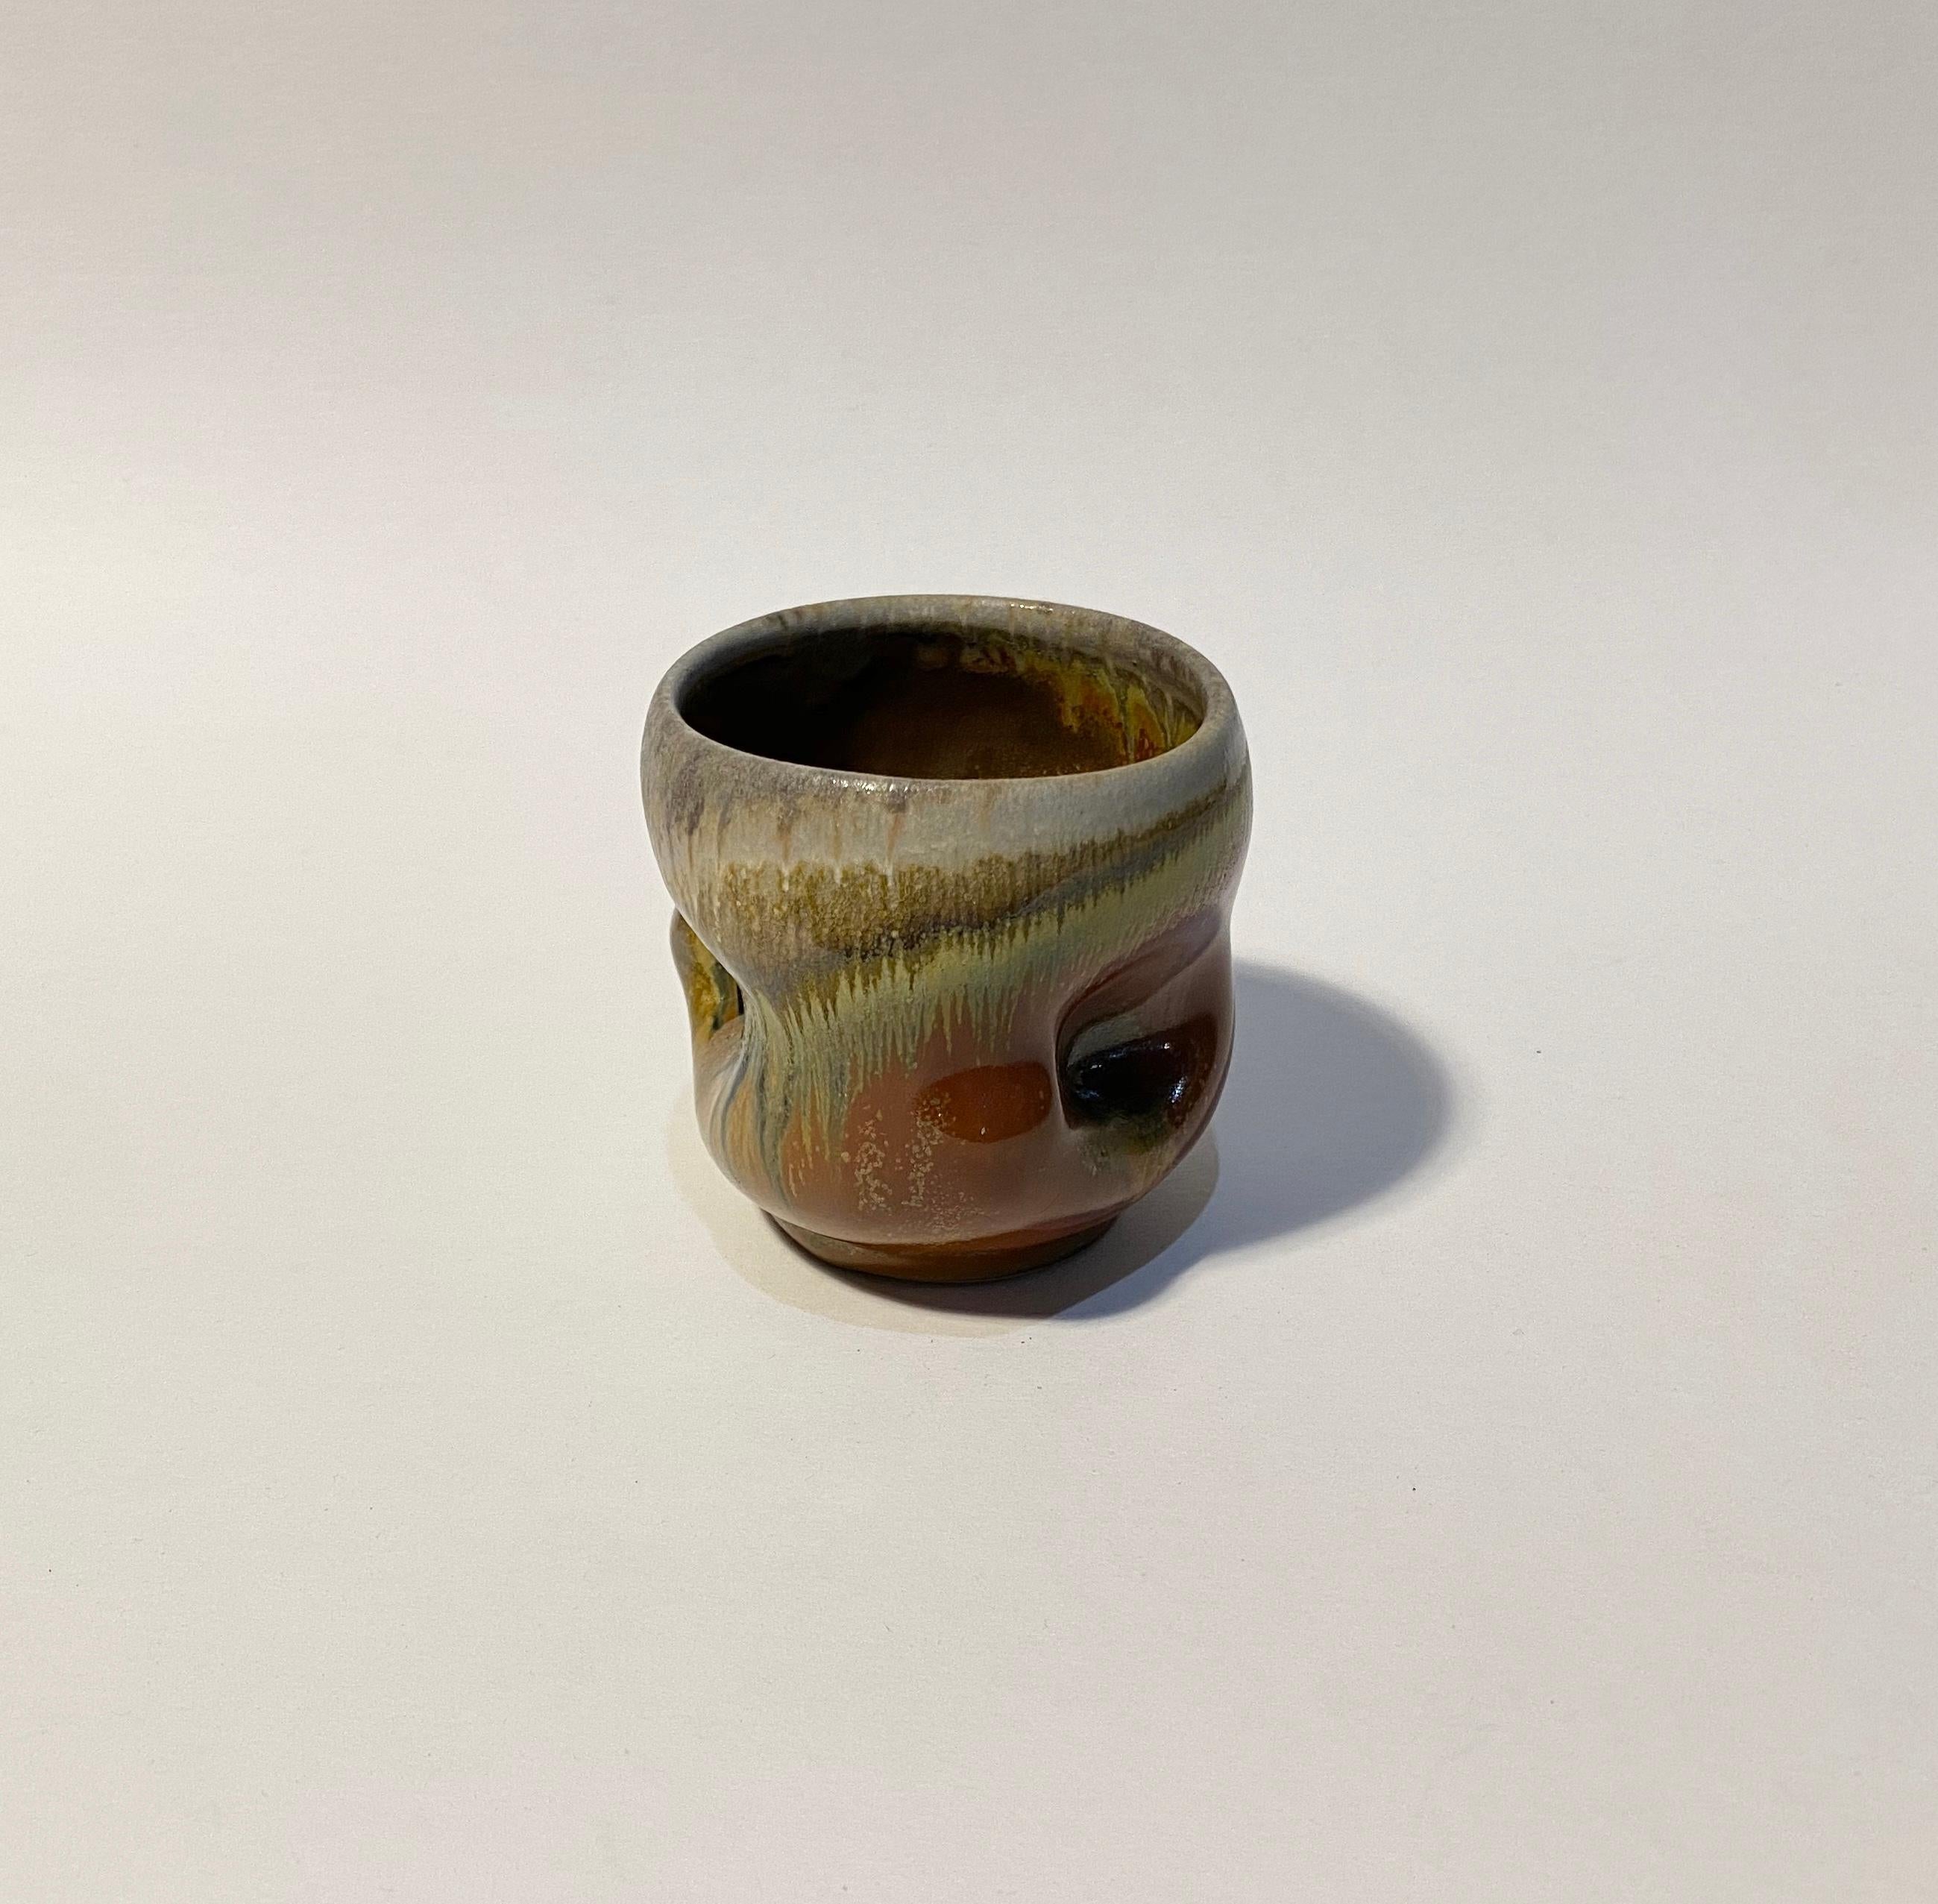 Chris Gustin, (born 1952)
Whiskey cup, 2019
Stoneware
Measures: 3.25 x 3.5 x 3.25
Anagama wood fired
Signed on the underside with the artist's device

Chris Gustin is a studio artist and Emeritus Professor at the University of Massachusetts,